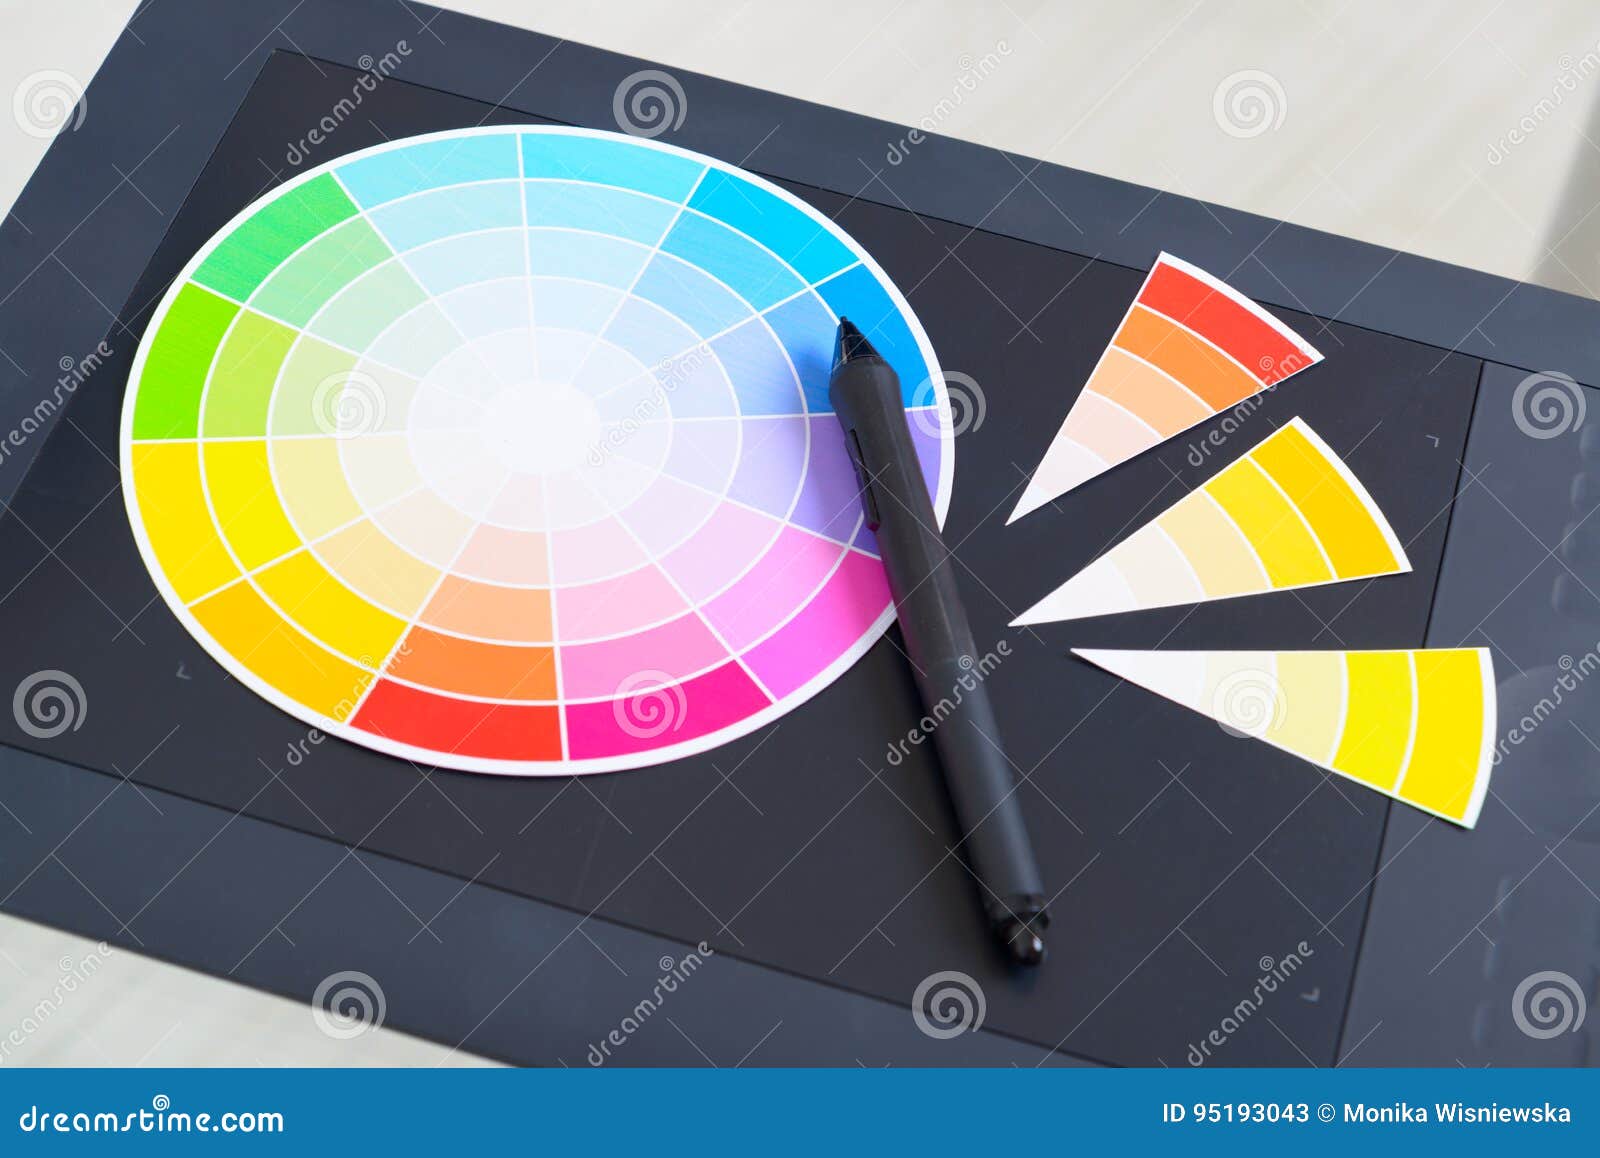 colour wheel and graphic tablet